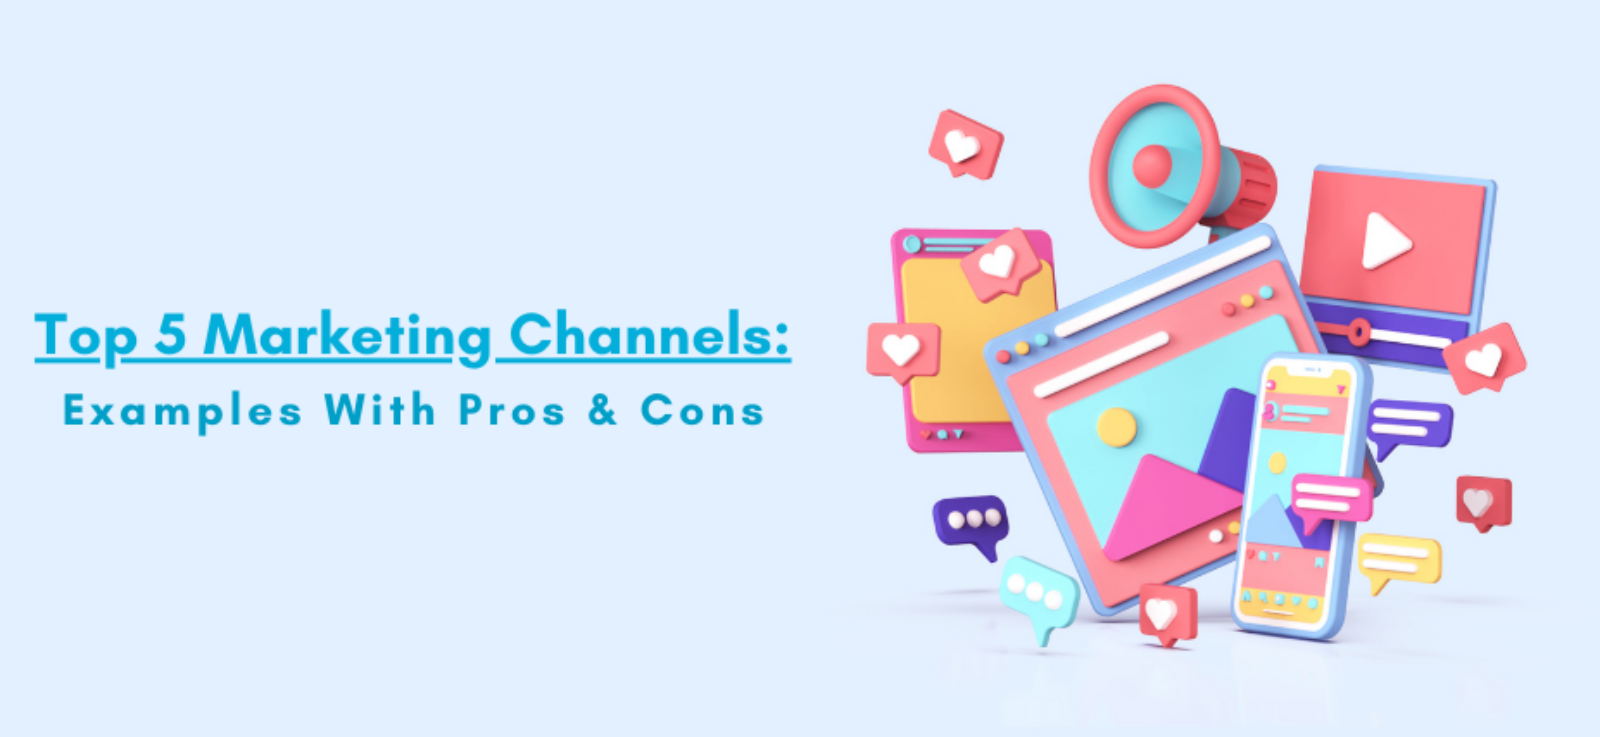 Top 5 Marketing Channels: Examples With Pros & Cons